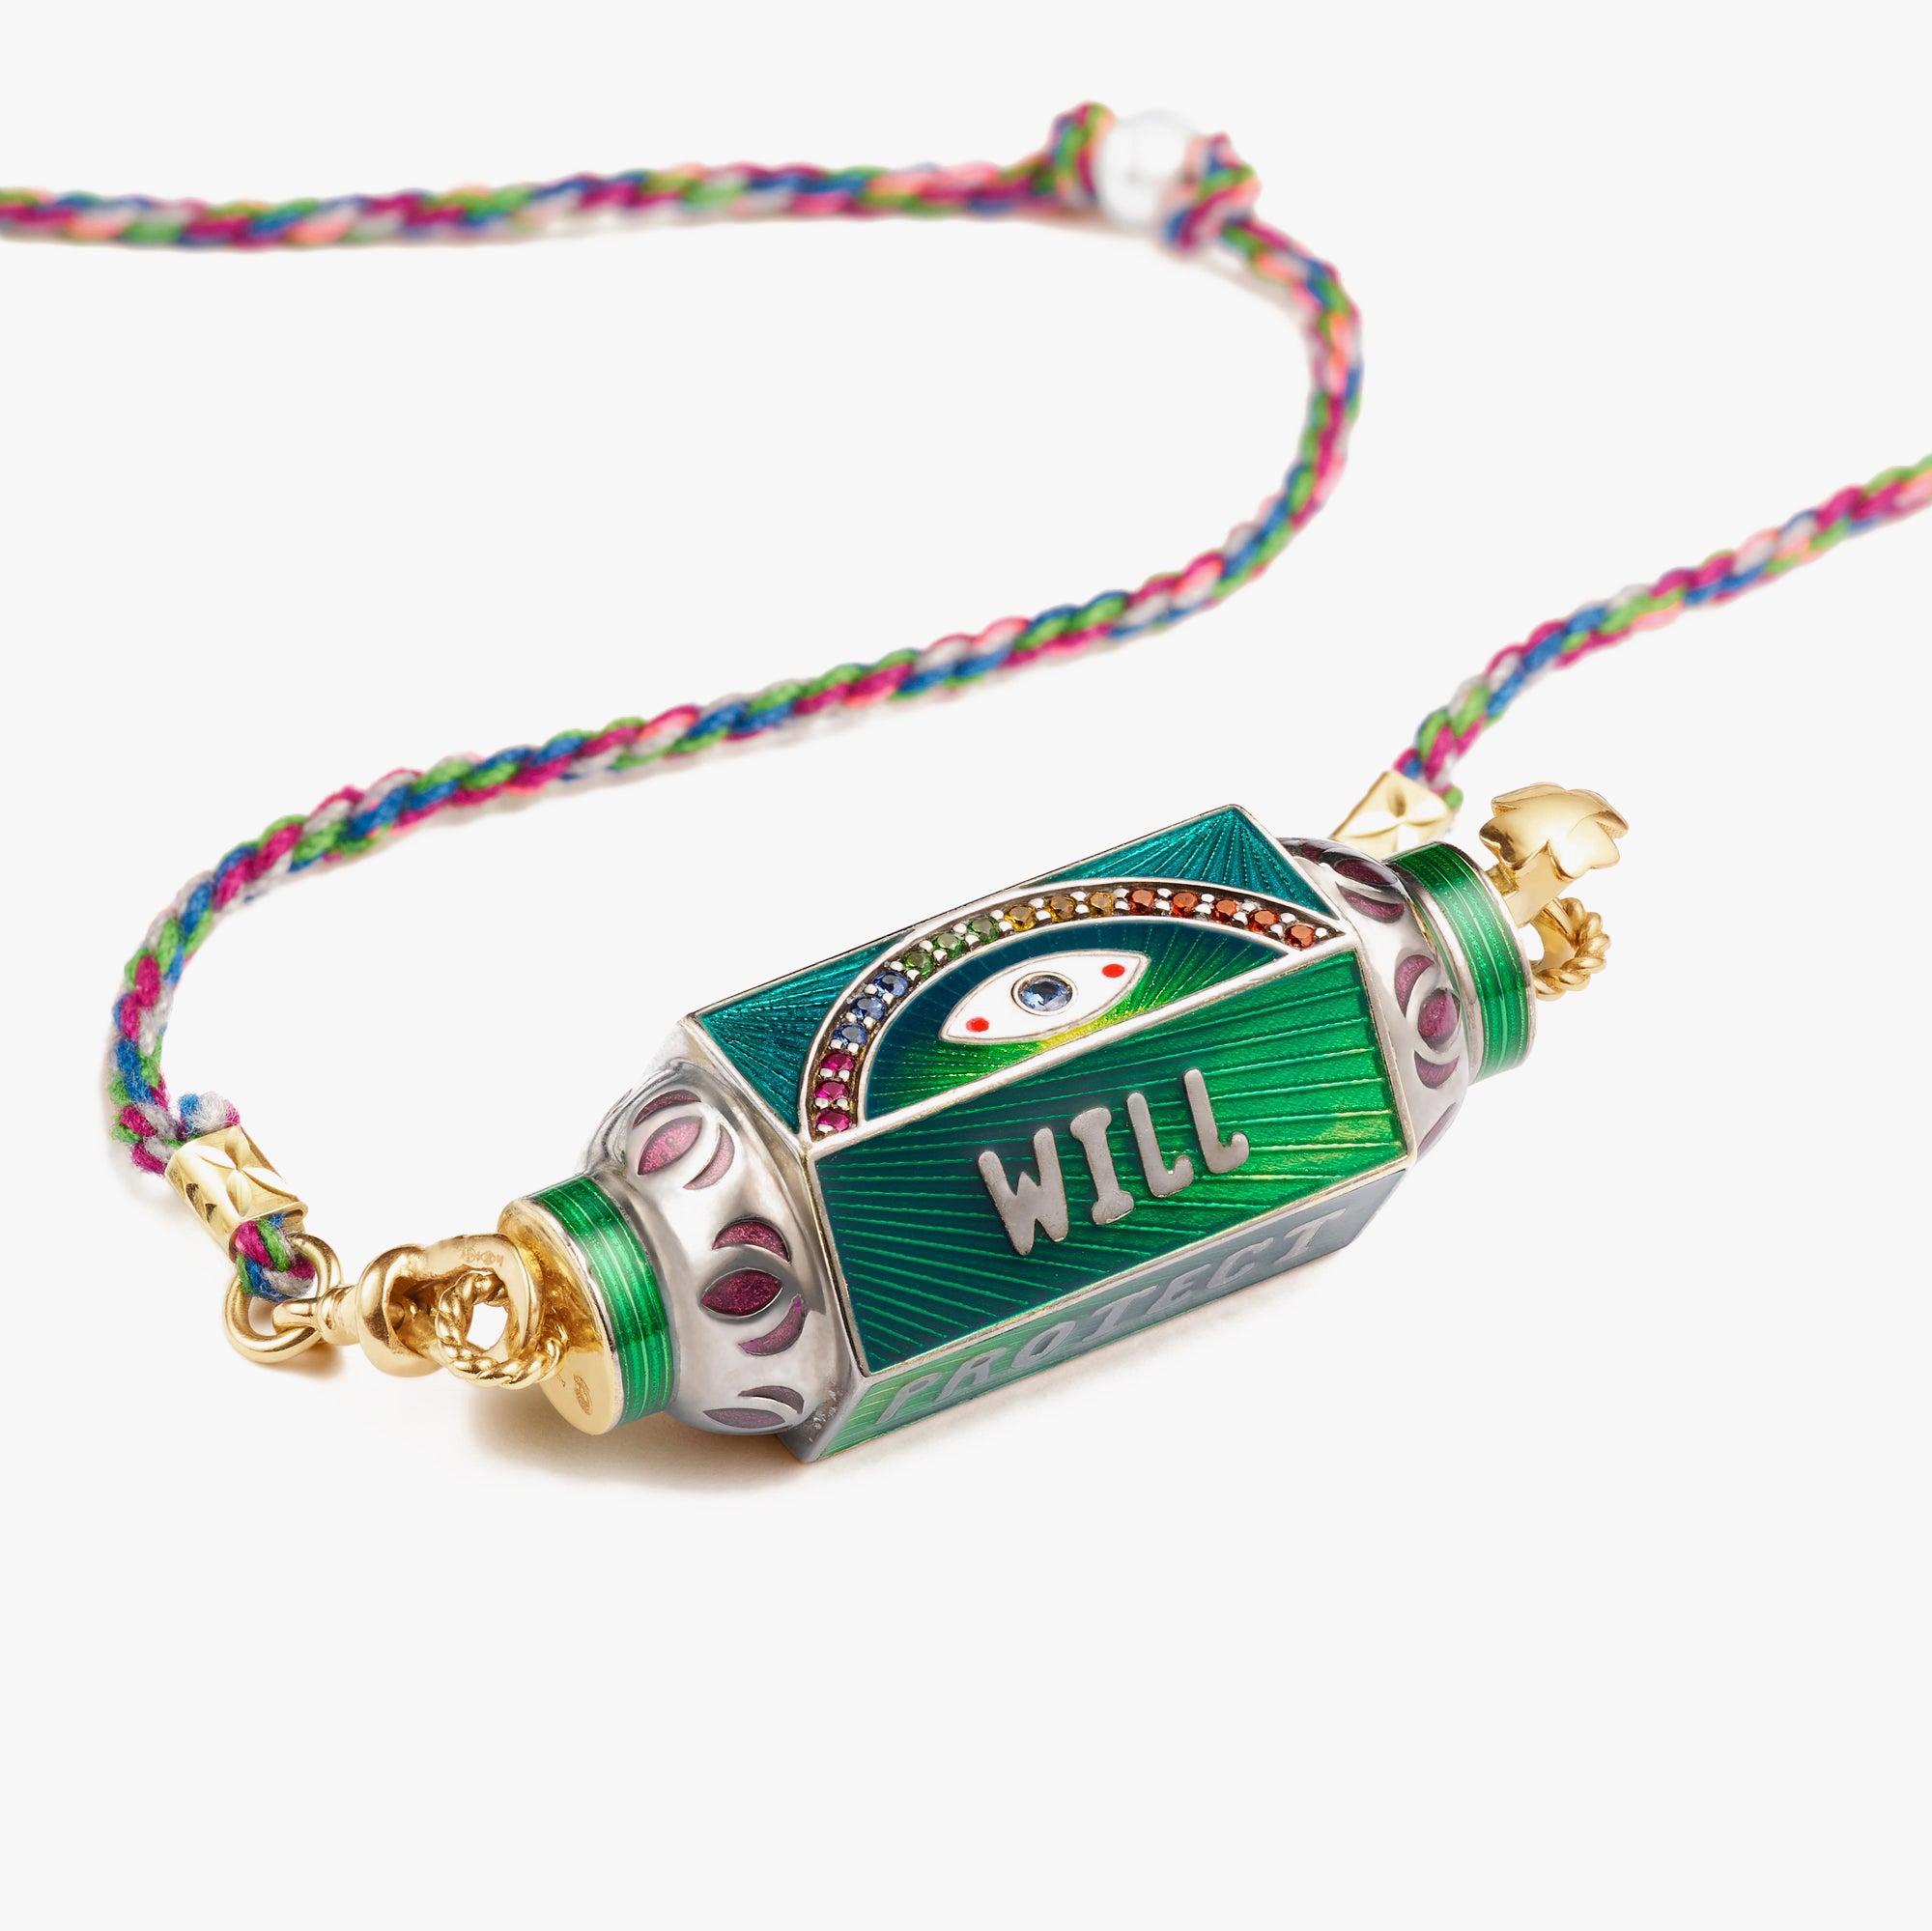 Eye will green 14k gold and rhodium locket with diamonds, sapphires and enamel on a blue and burgundy Mauli pearl necklace